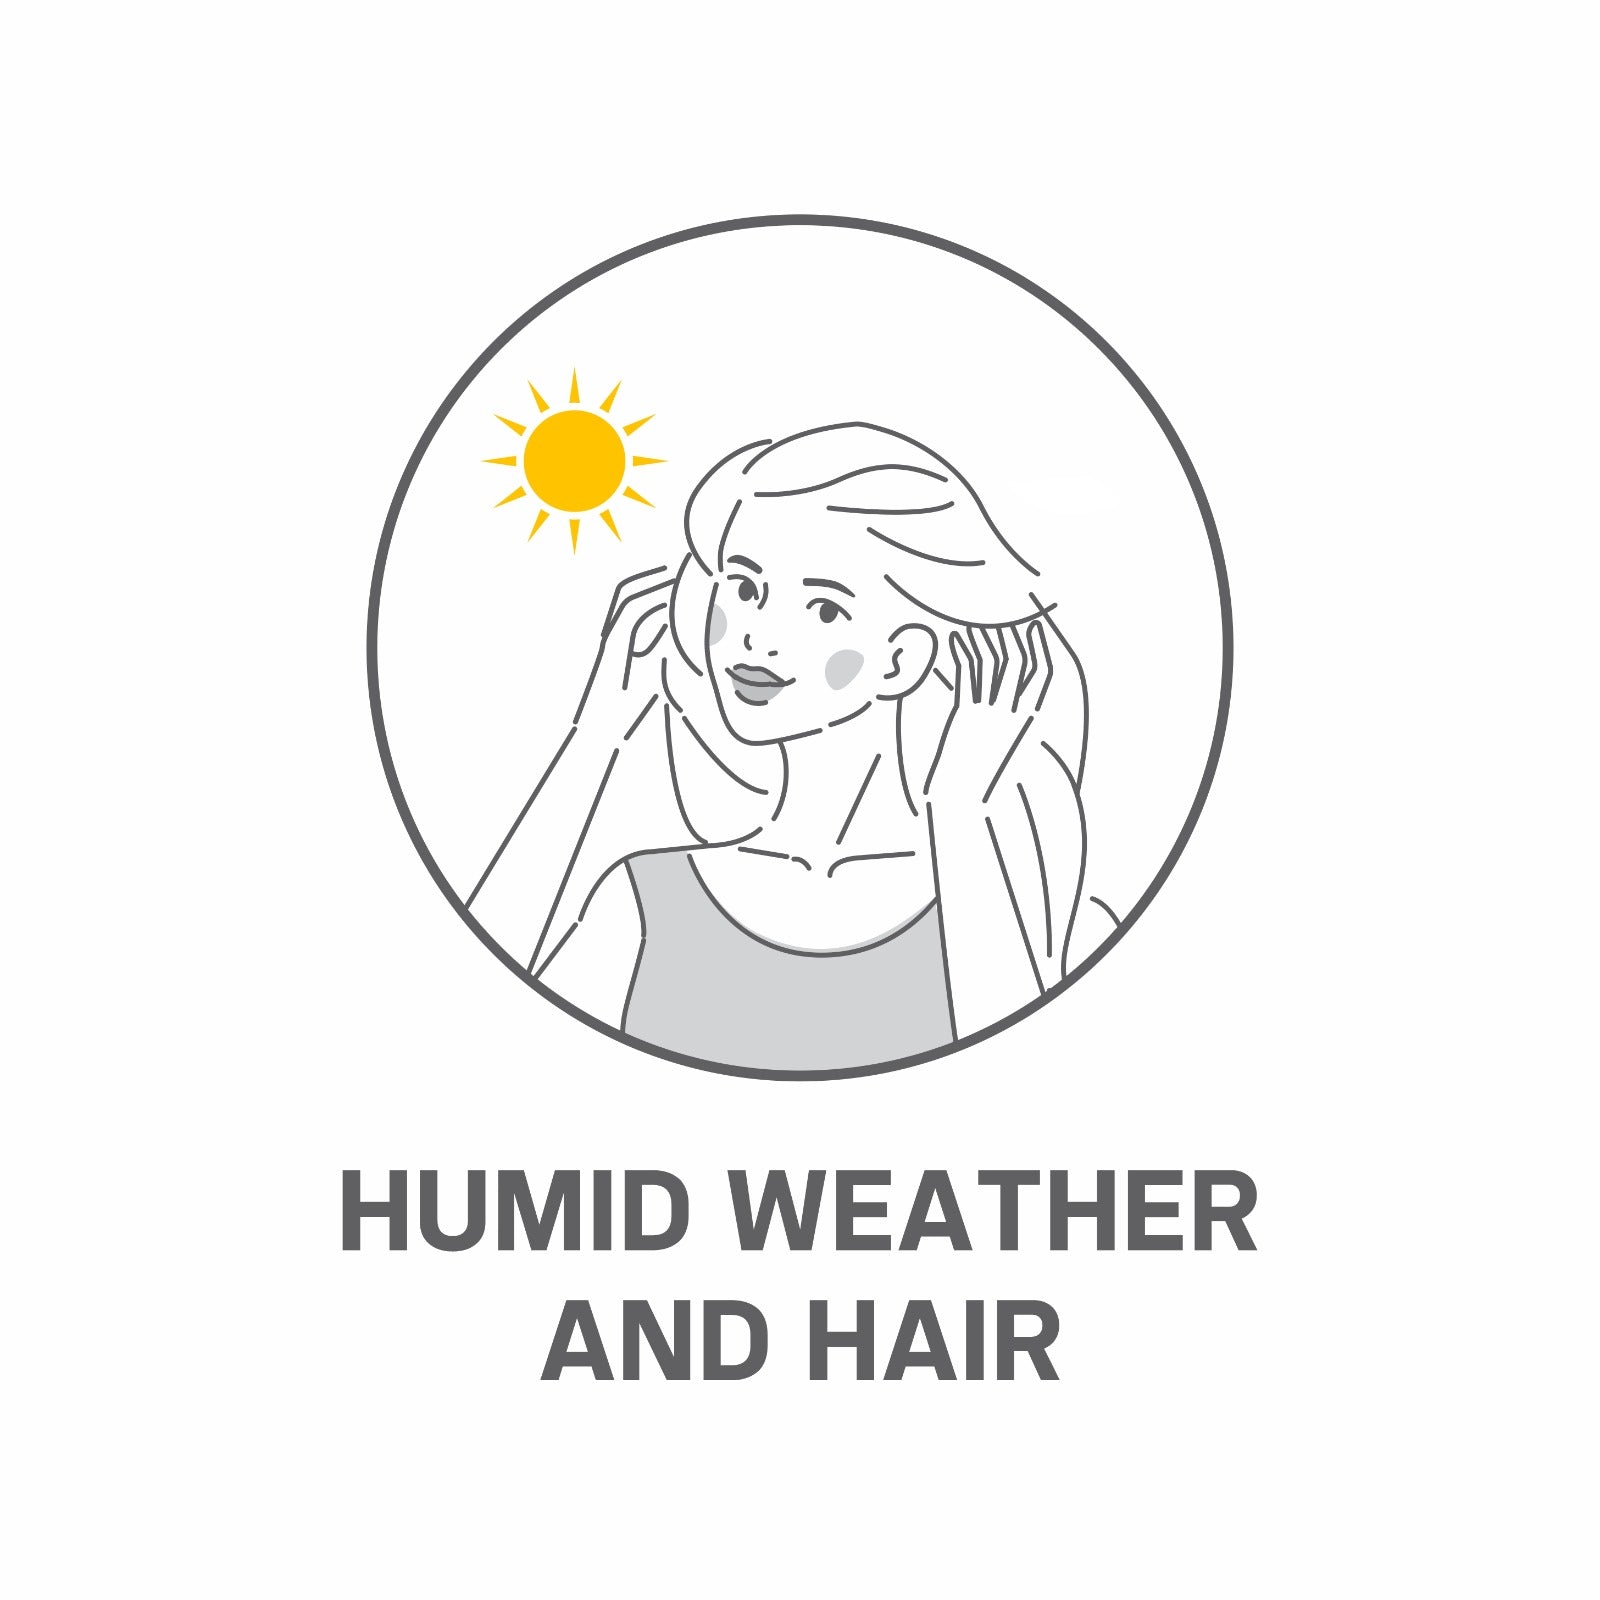 Effects Of Humid Weather On Hair